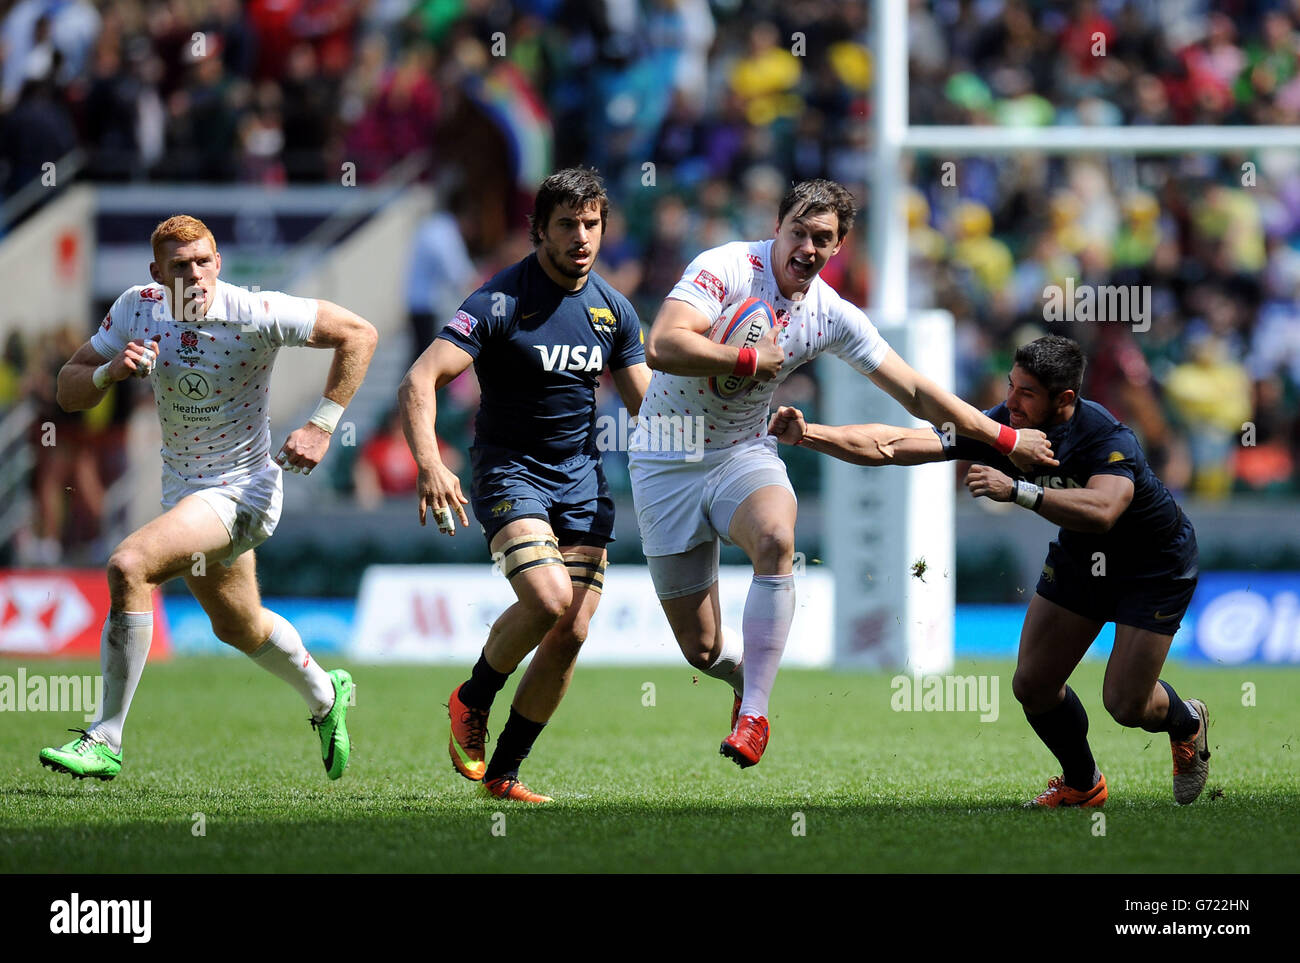 England's Alex Gray (centre) skips between two Argentinian defenders on his way to scoring a try during Match 16 at the Marriott London Sevens at Twickenham Stadium, London. Stock Photo